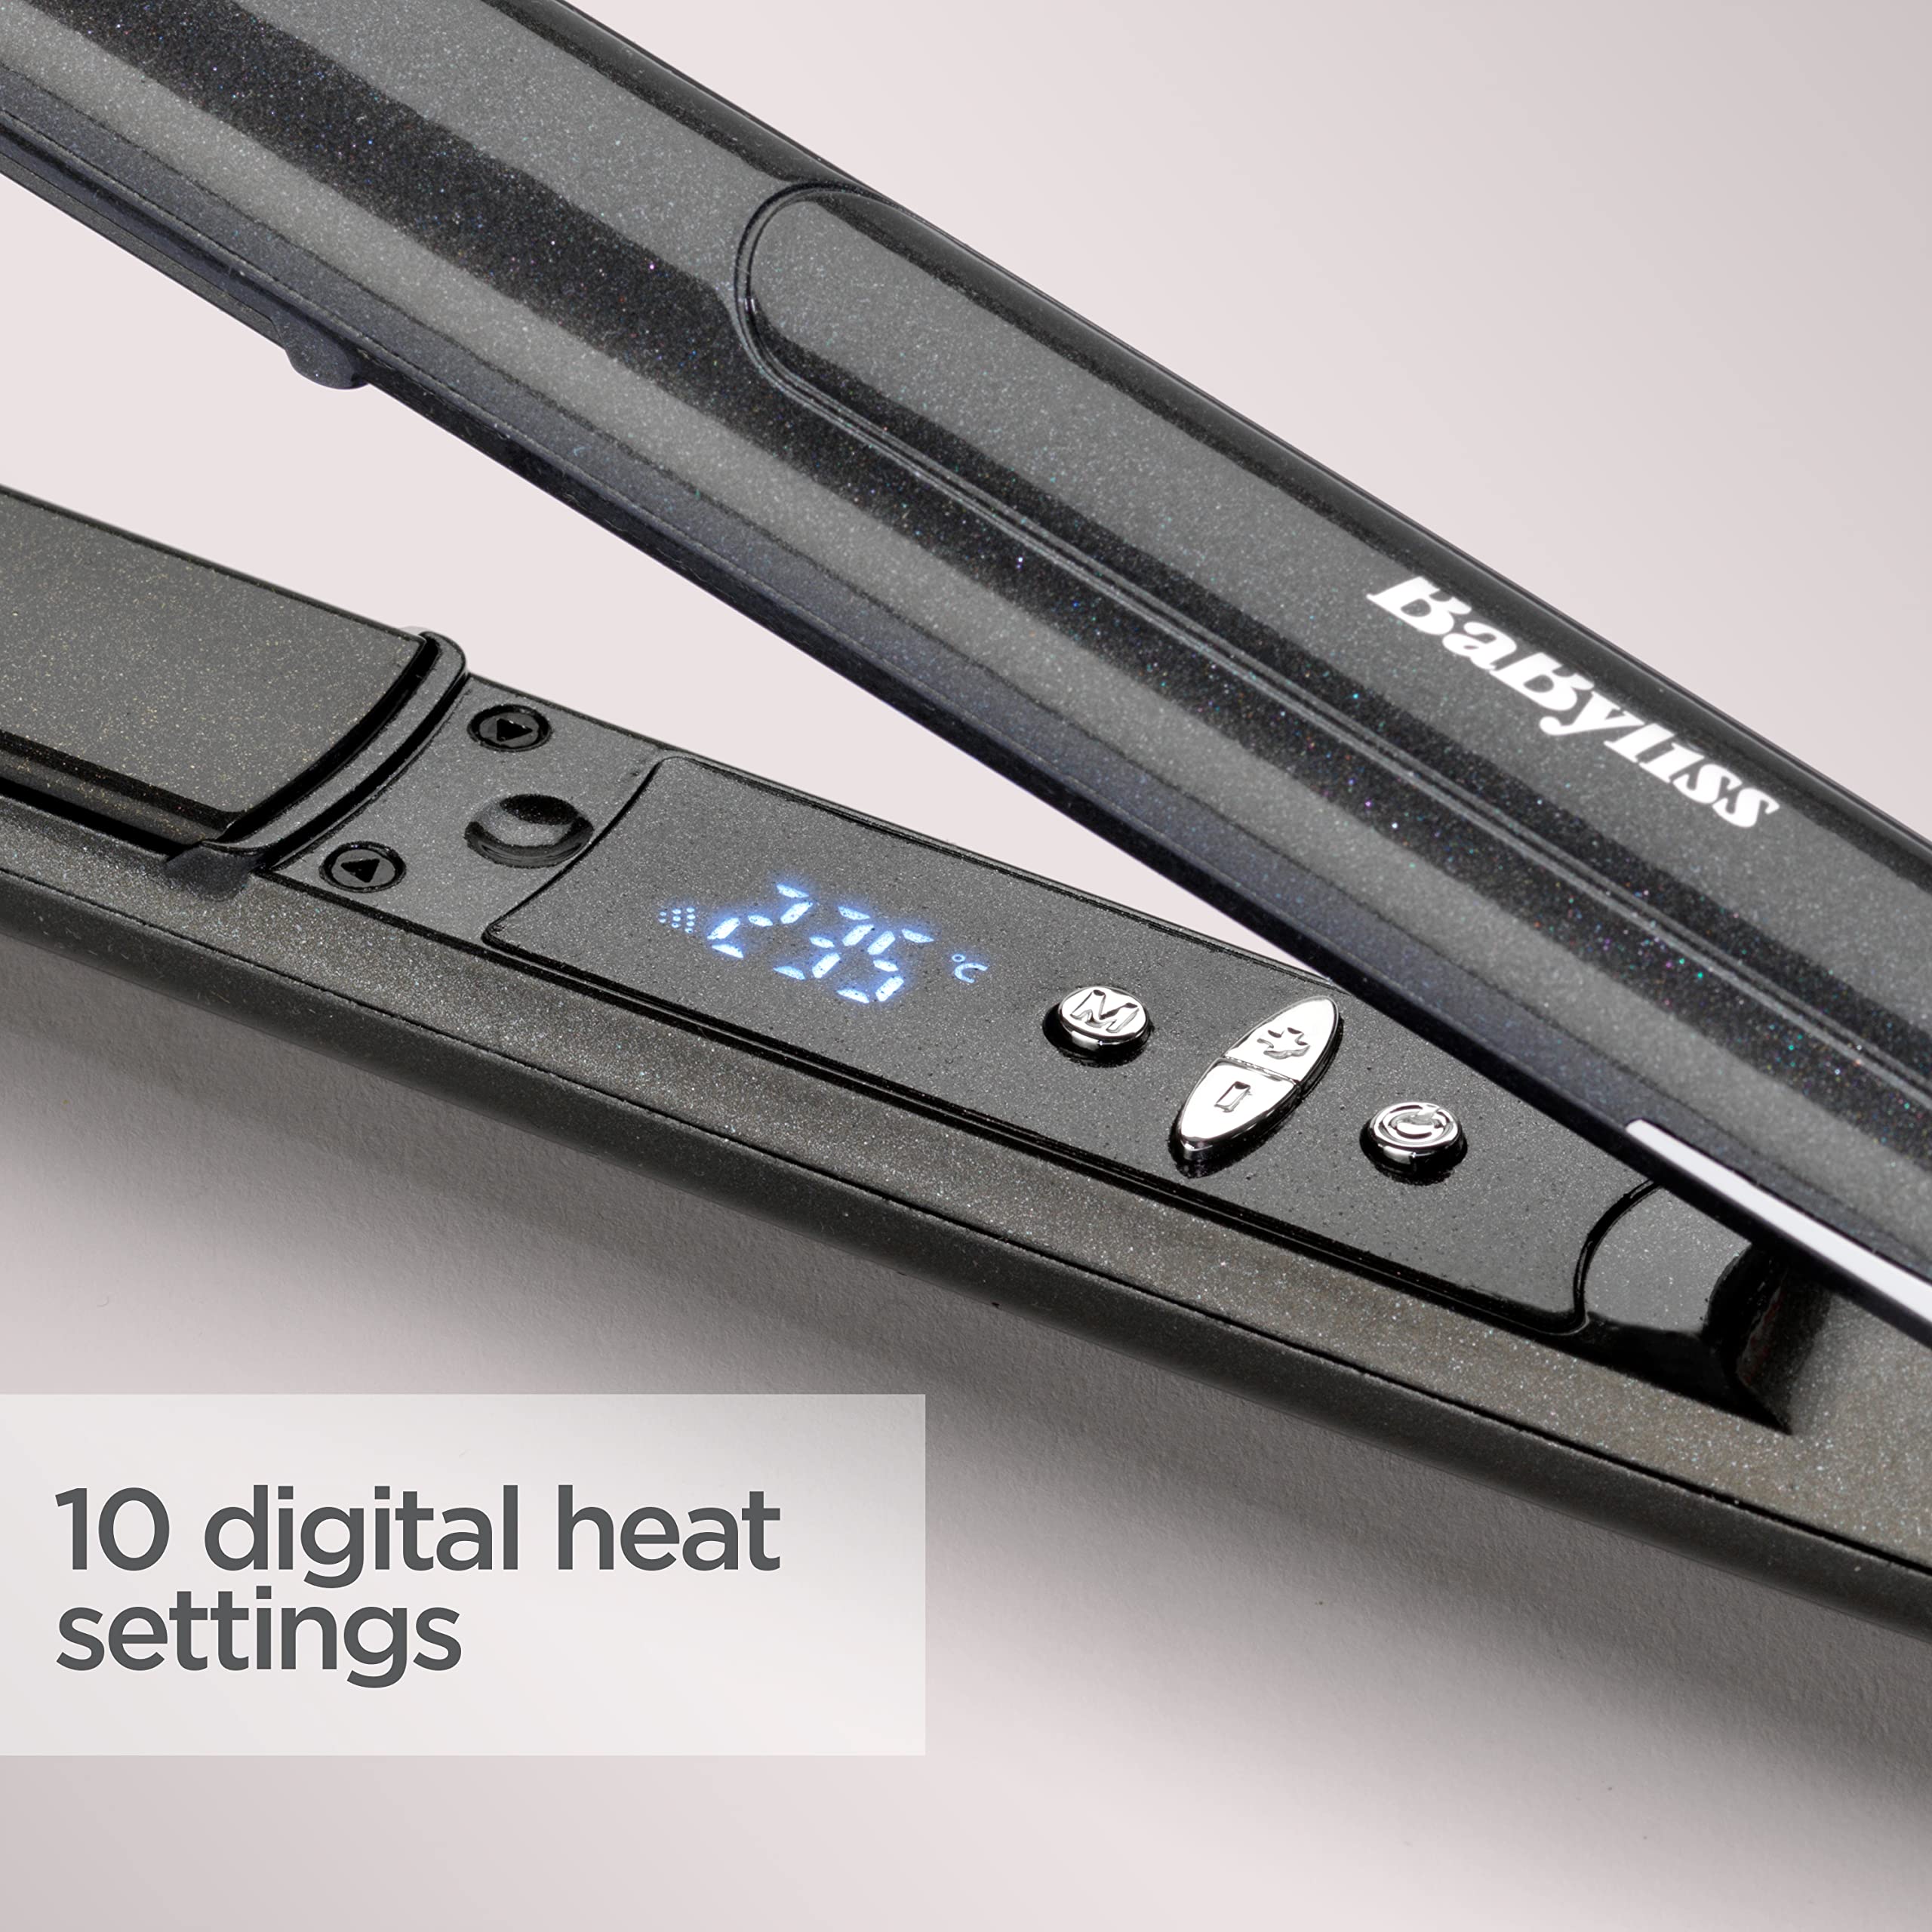 BaByliss Platinum Diamond Infused Hair Straightener | Smooth & Rapid Styling With 24mm Elongated Ceramic Plates | 10 Heat Settings Up to 235°C | Ionic Frizz Control & Auto Shut Off